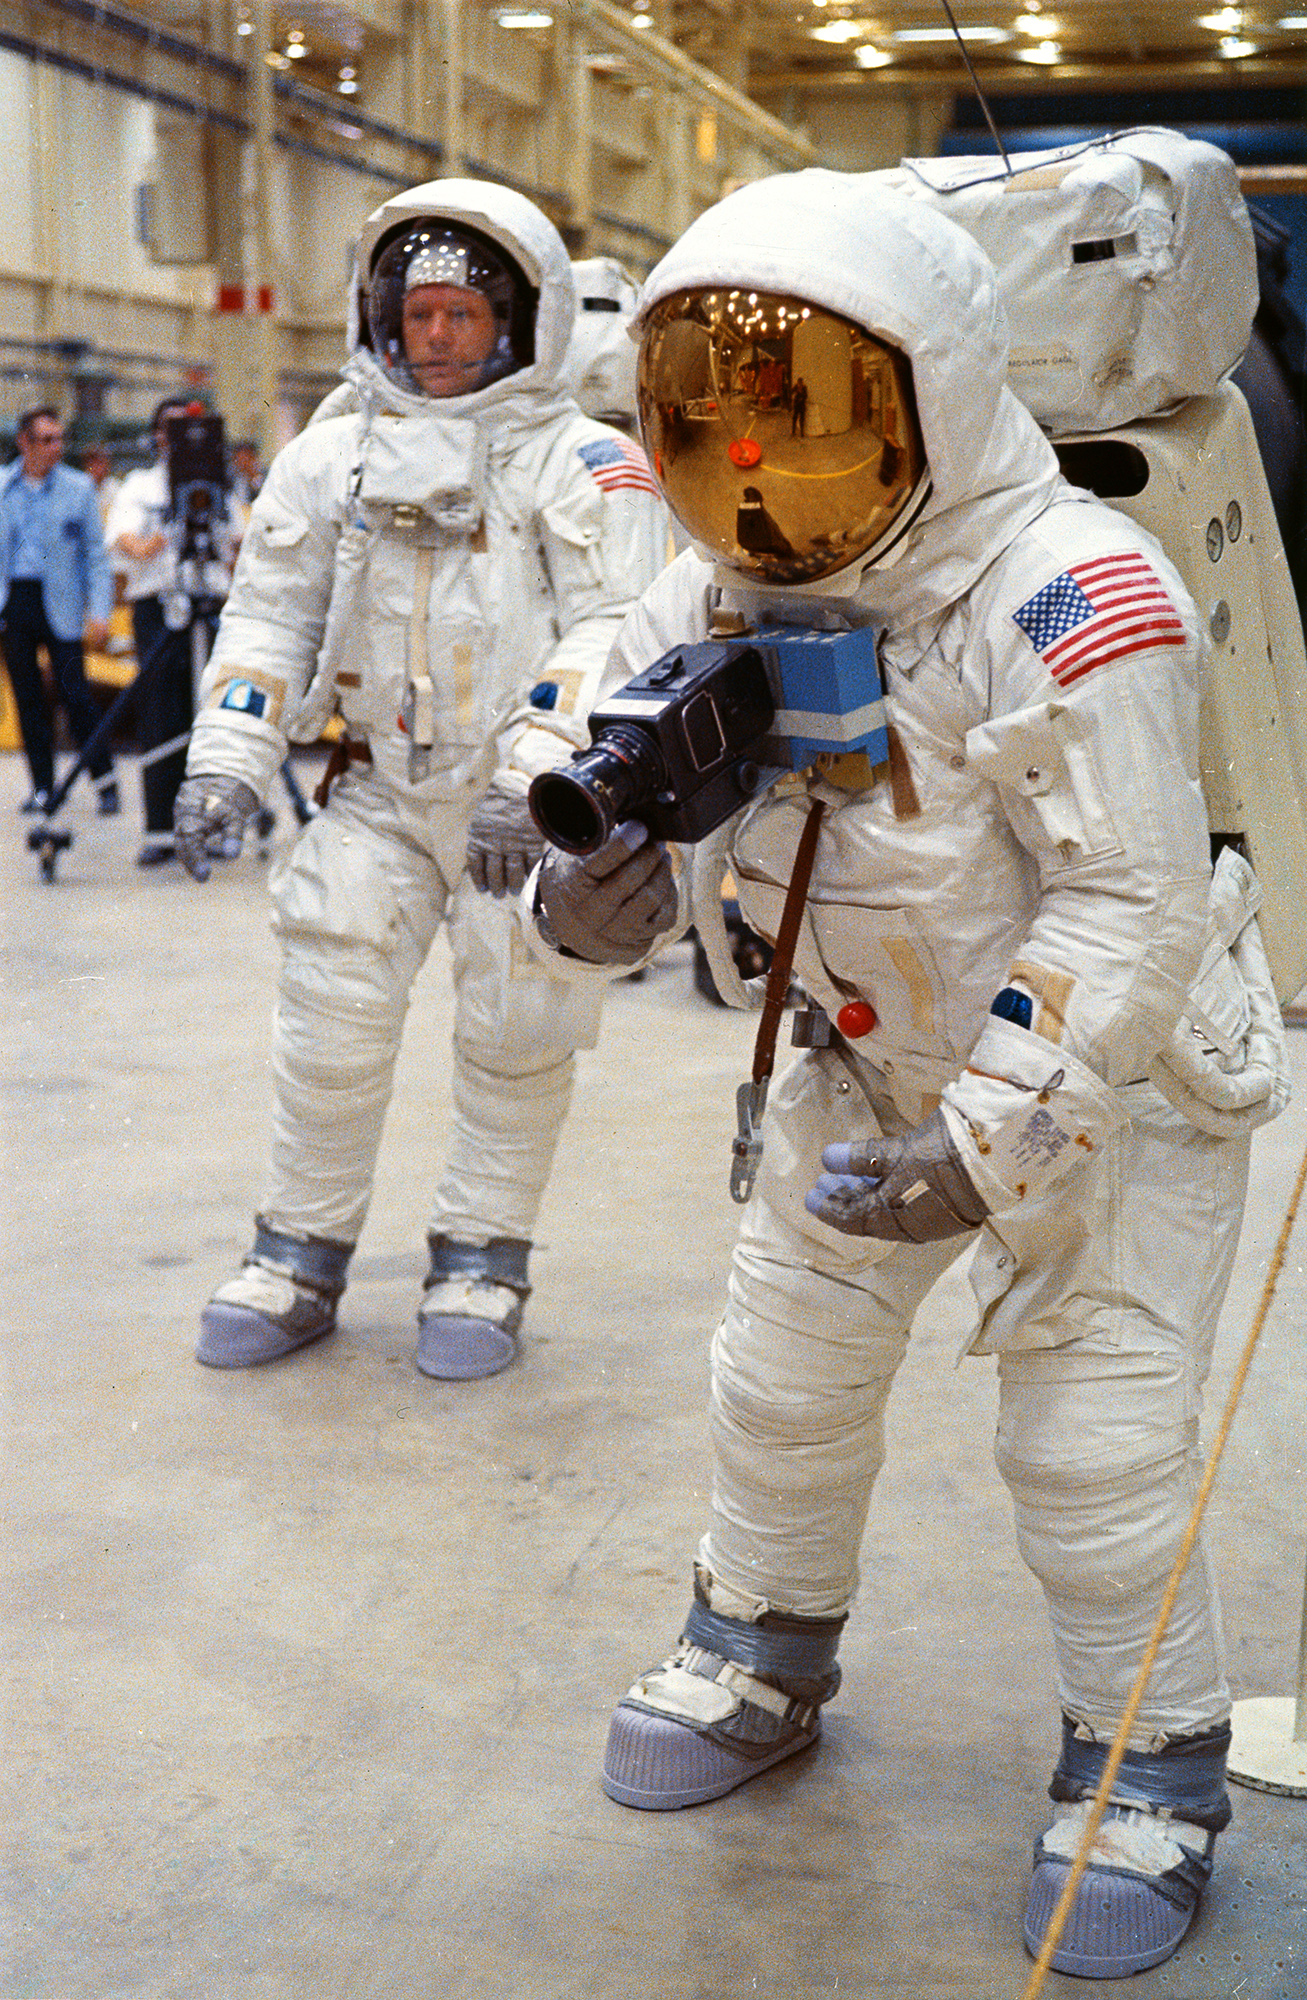 apollo-11-astronauts-practicing-lunar-surface-mobility-at-msc.jpg